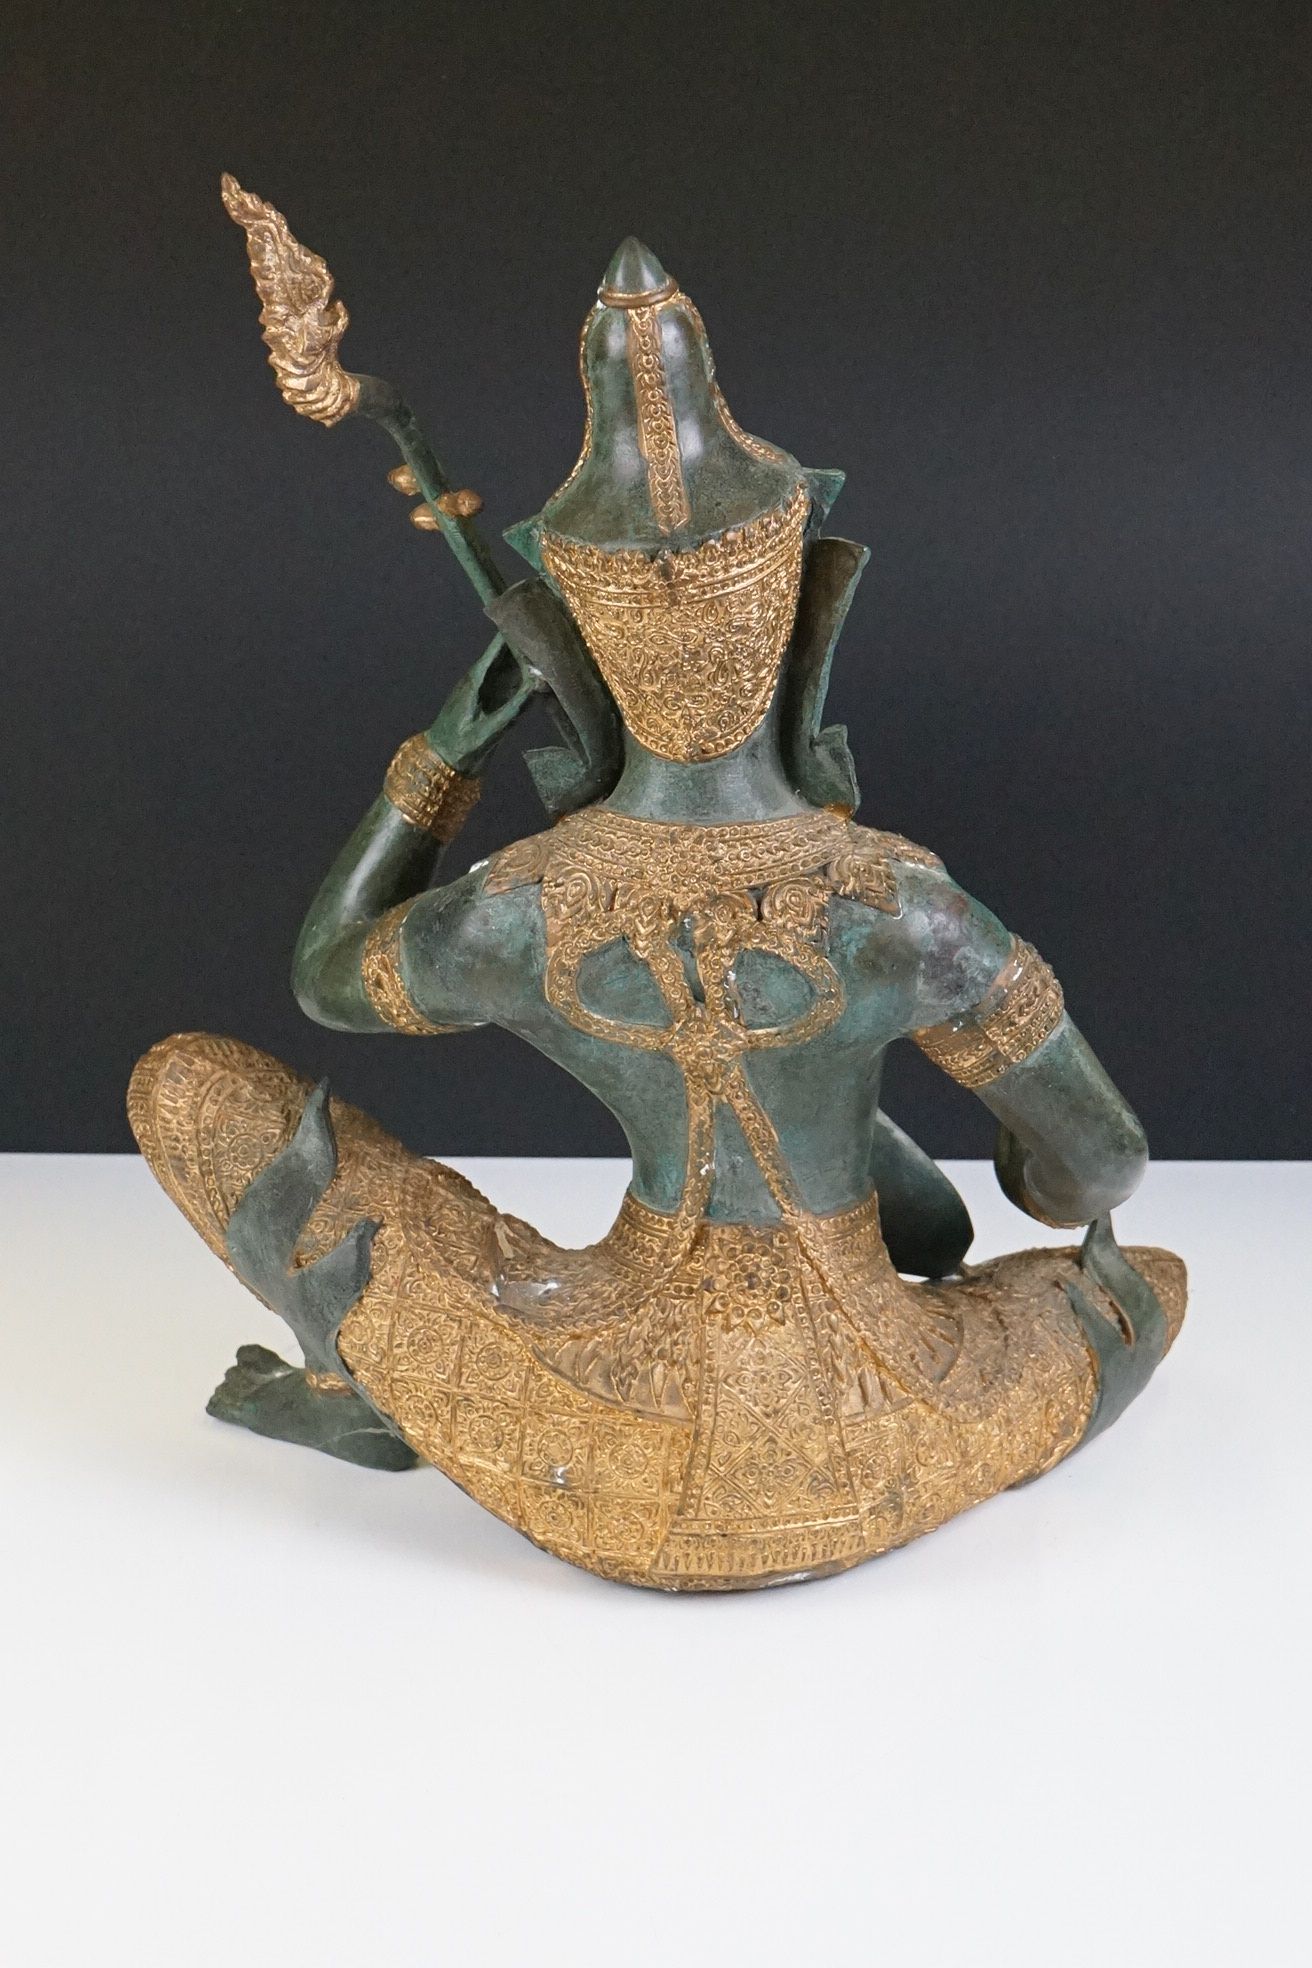 Pair of Thai bronze & gilt sculptures of deities playing musical instruments, one playing a Sueng, - Image 10 of 10